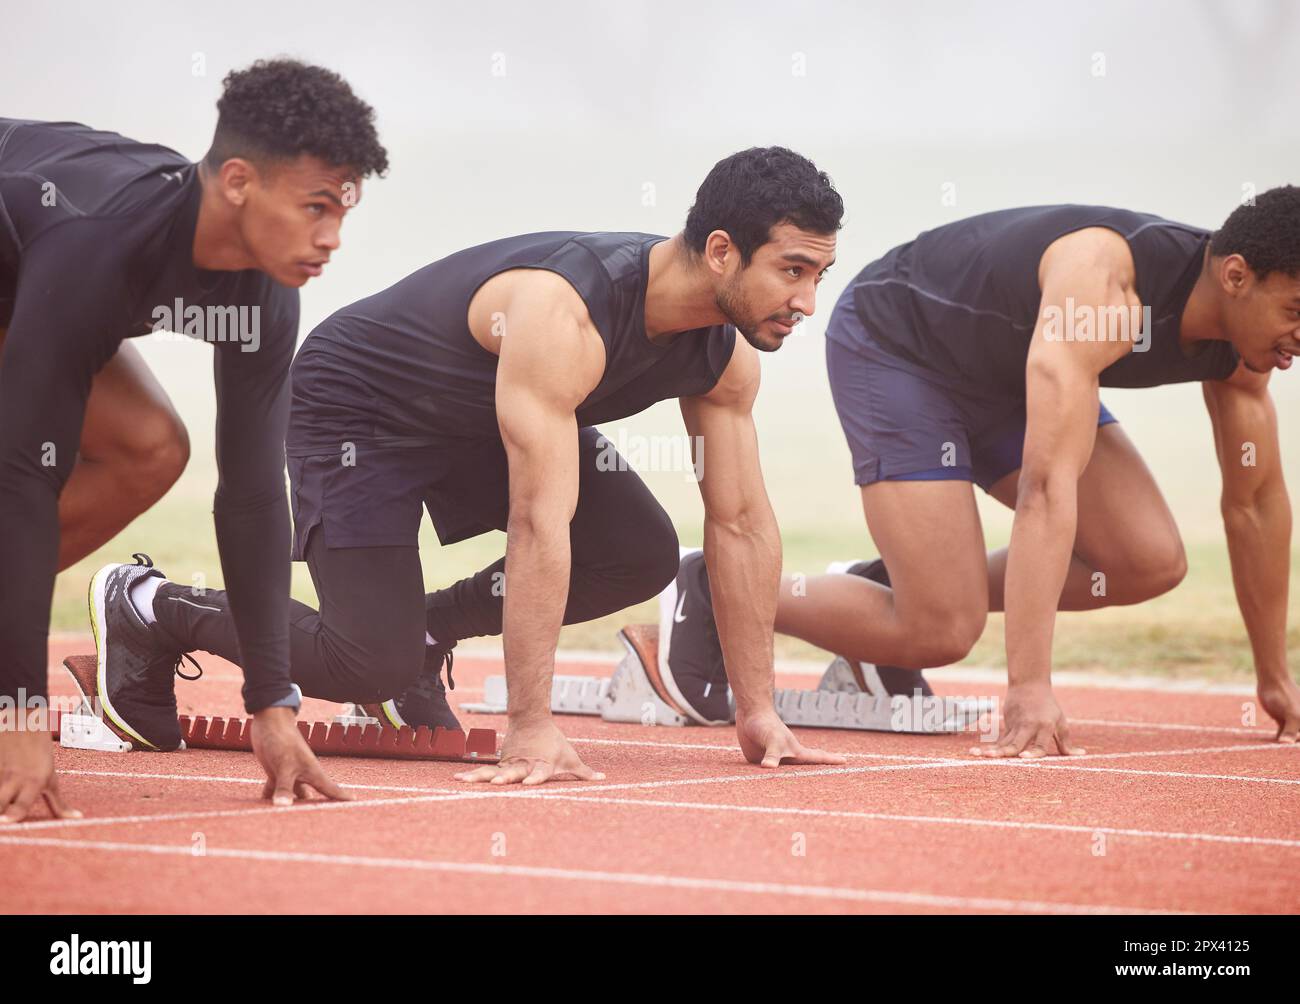 Ready to get started. three handsome young male athletes starting their race on a track Stock Photo